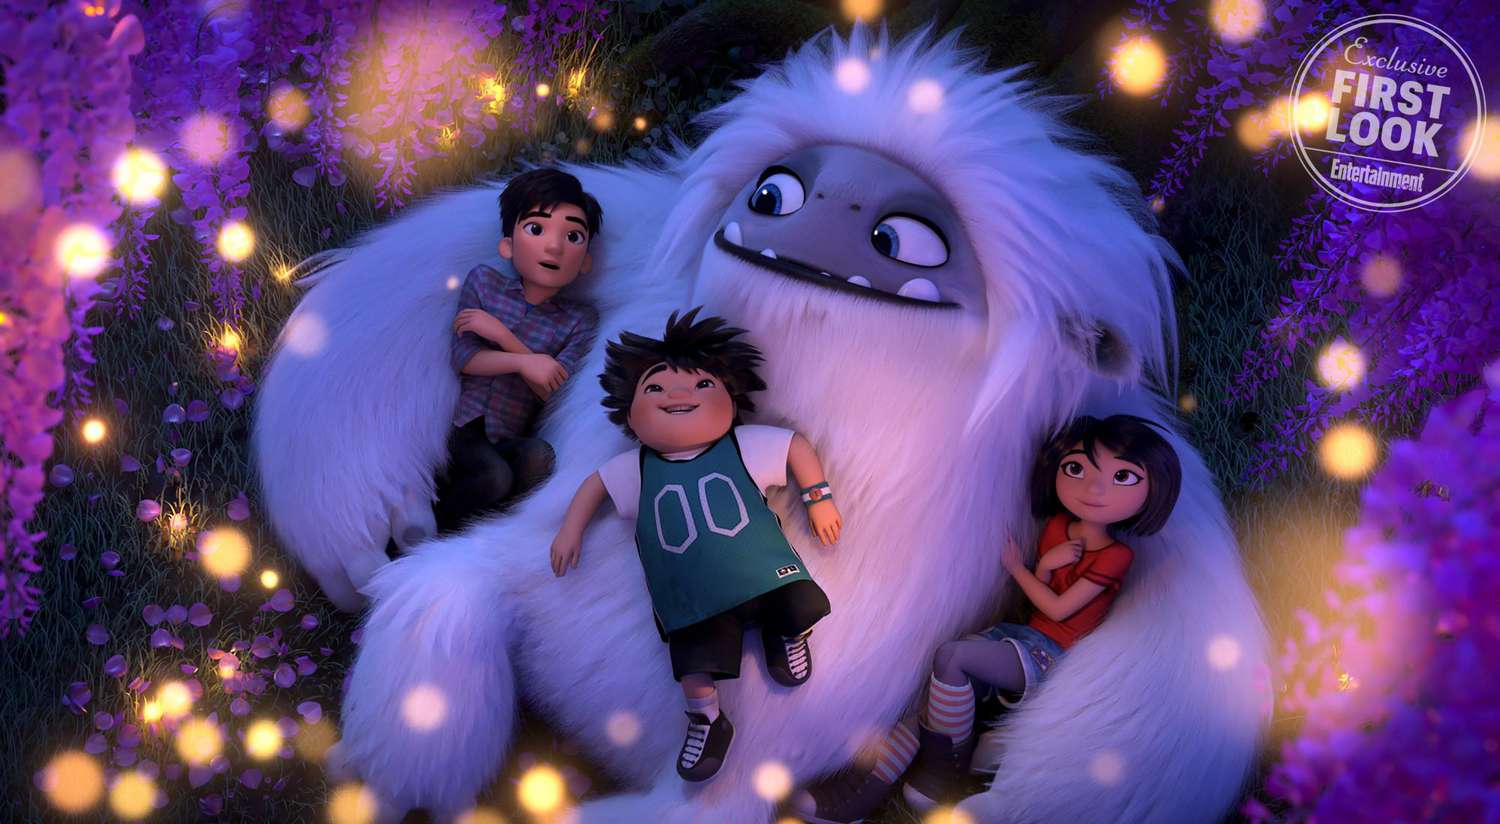 Abominable first look: Meet the fuzzy yeti hero of new DreamWorks film |  